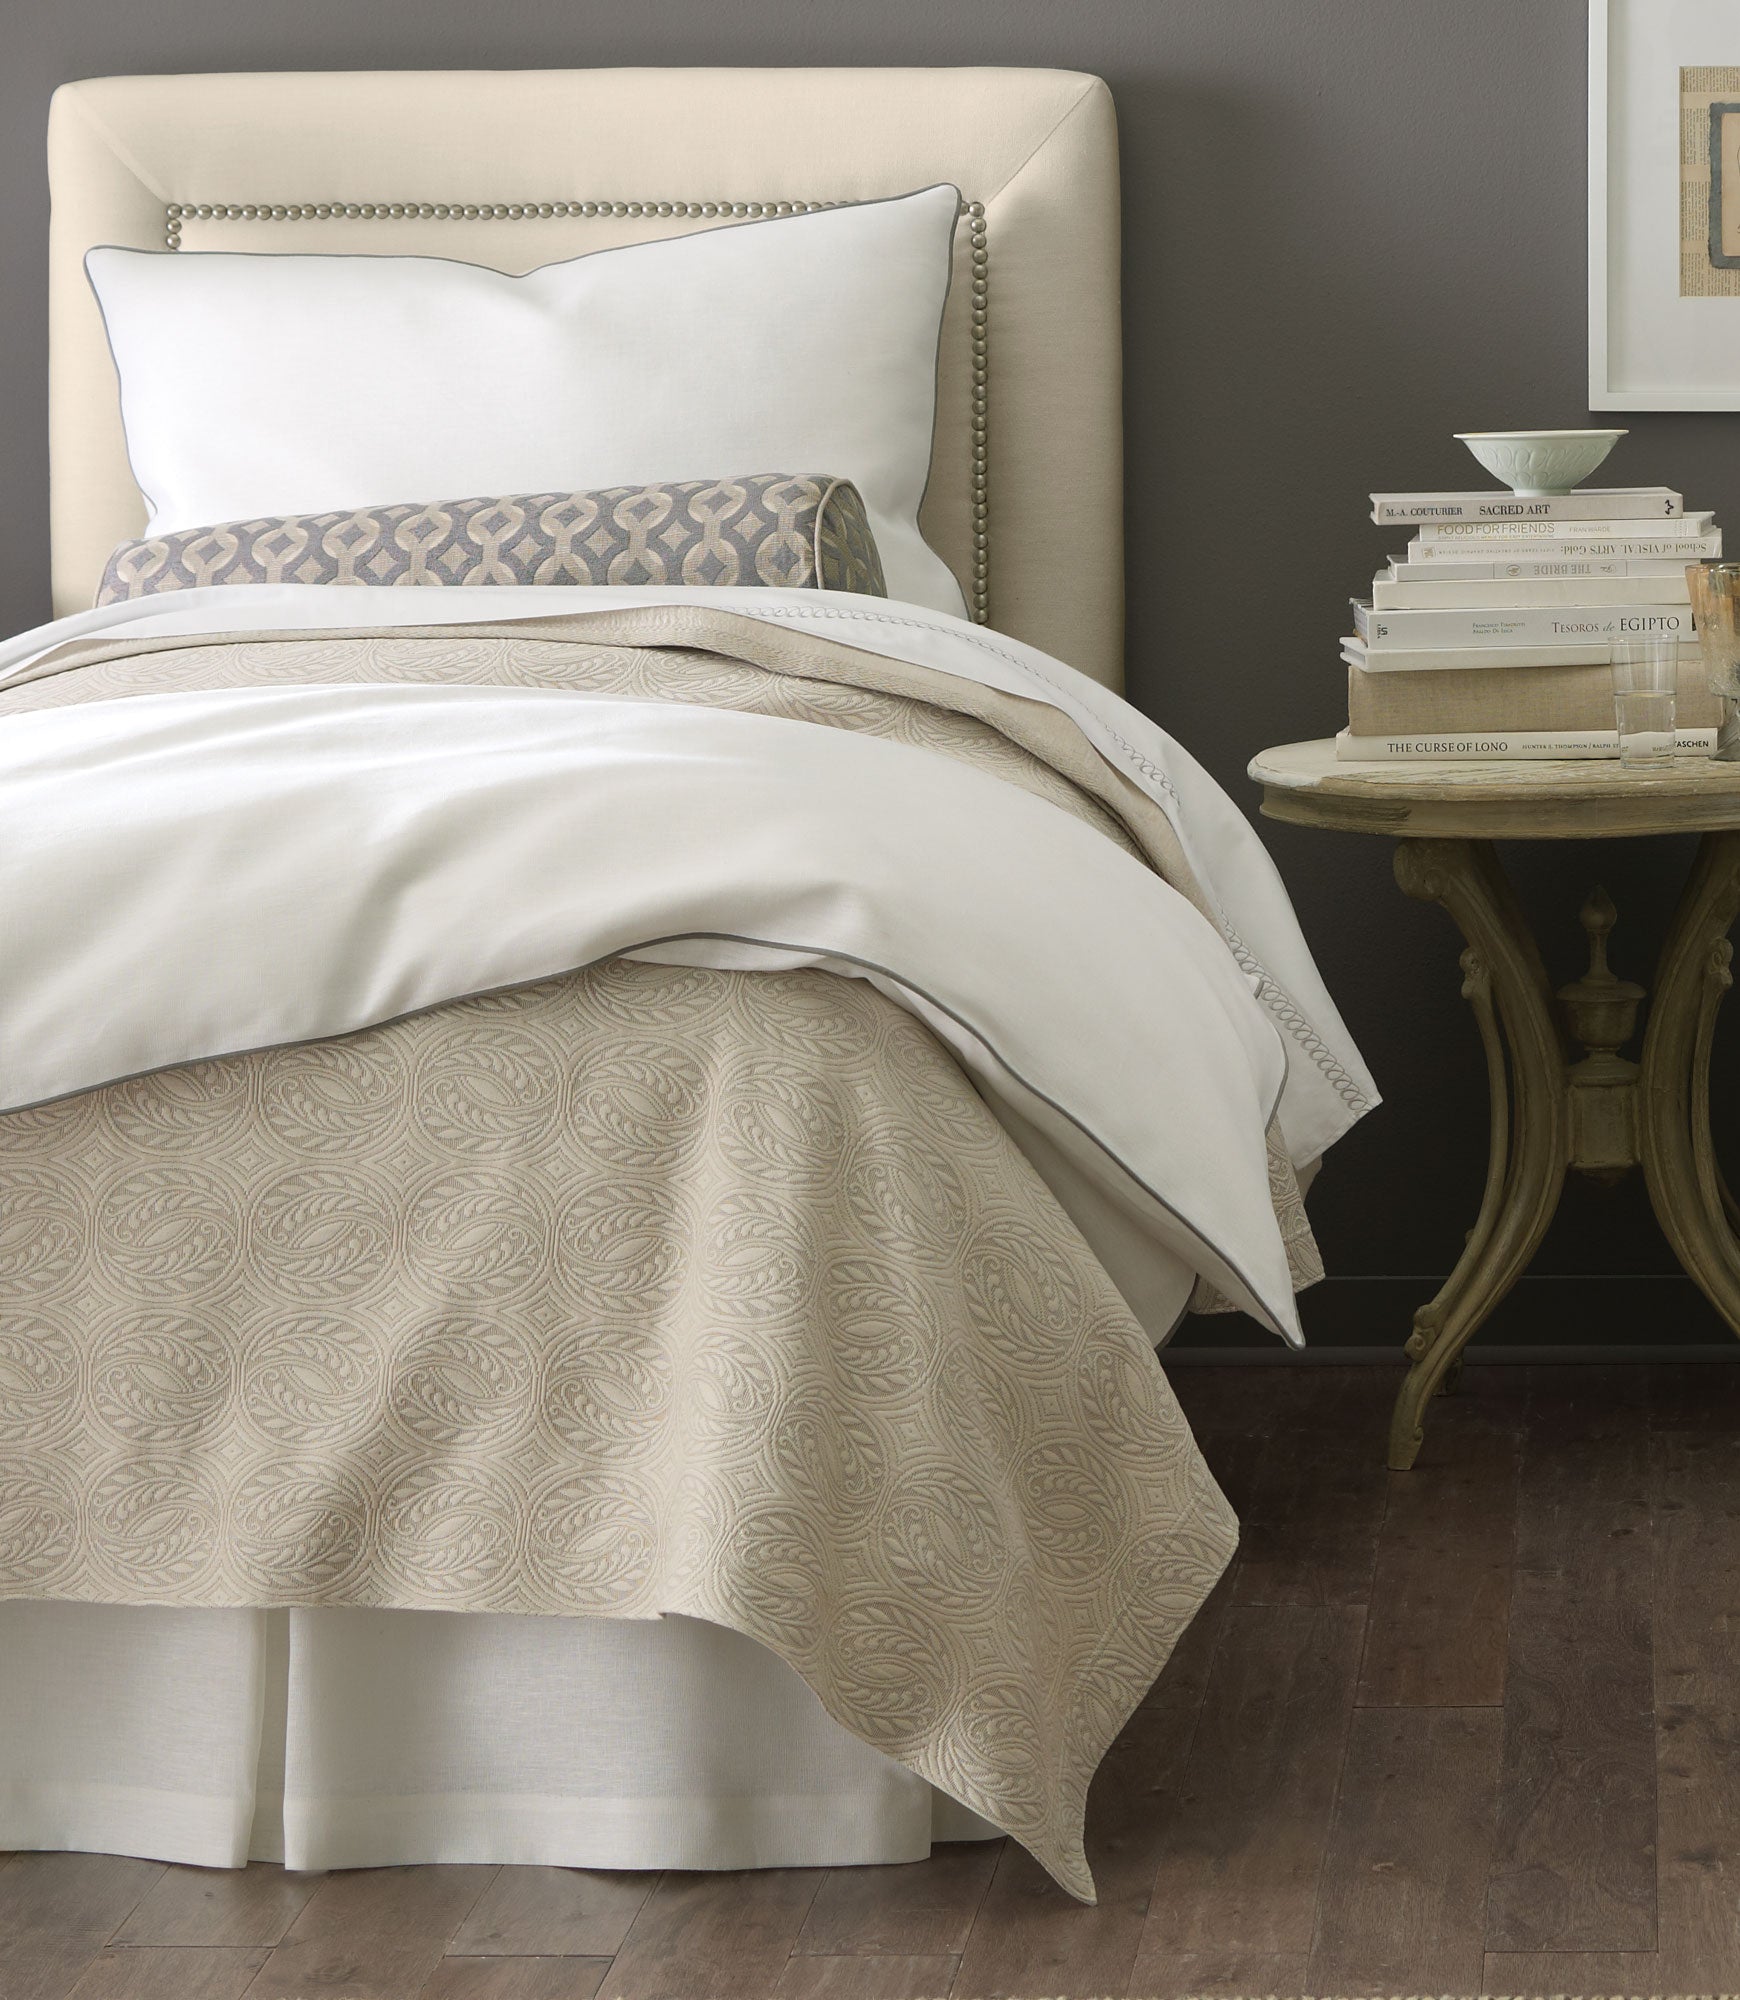 Dust Ruffle vs Bed Skirt: What's the Difference